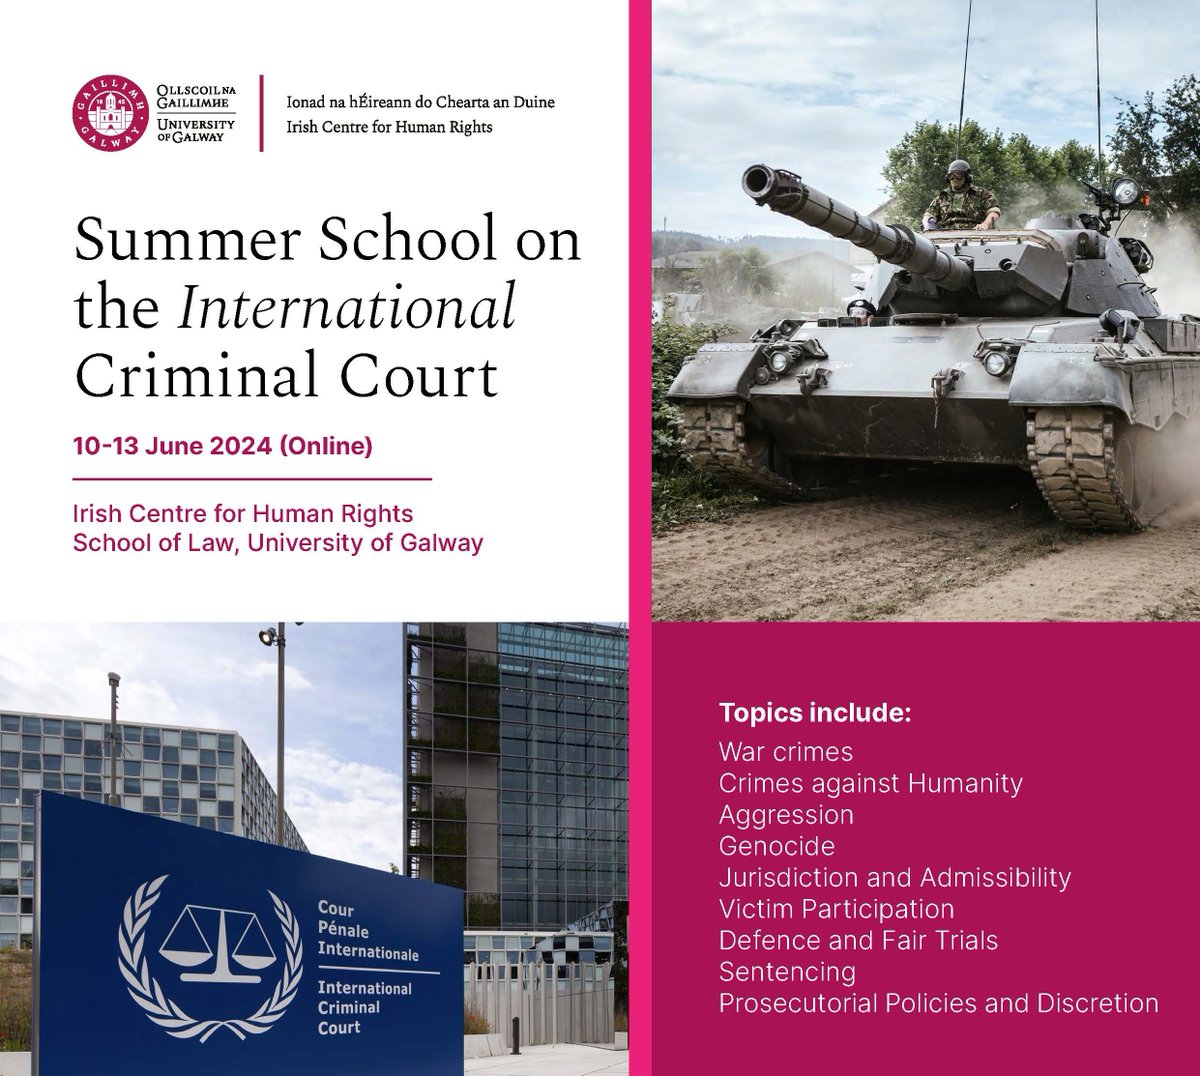 Join us for @ICCSummerSchool @UniOfGalway, hosted online by @IrishCentreHR! Dive deep into topics like War Crimes, Genocide, and more.

Dates: 10-13 June 2024
Registration Fee: €75
Register now: universityofgalwayichr.clr.events/event/135501

#UniversityOfGalway #ForYouForTomorrow #GalwayLaw #Law